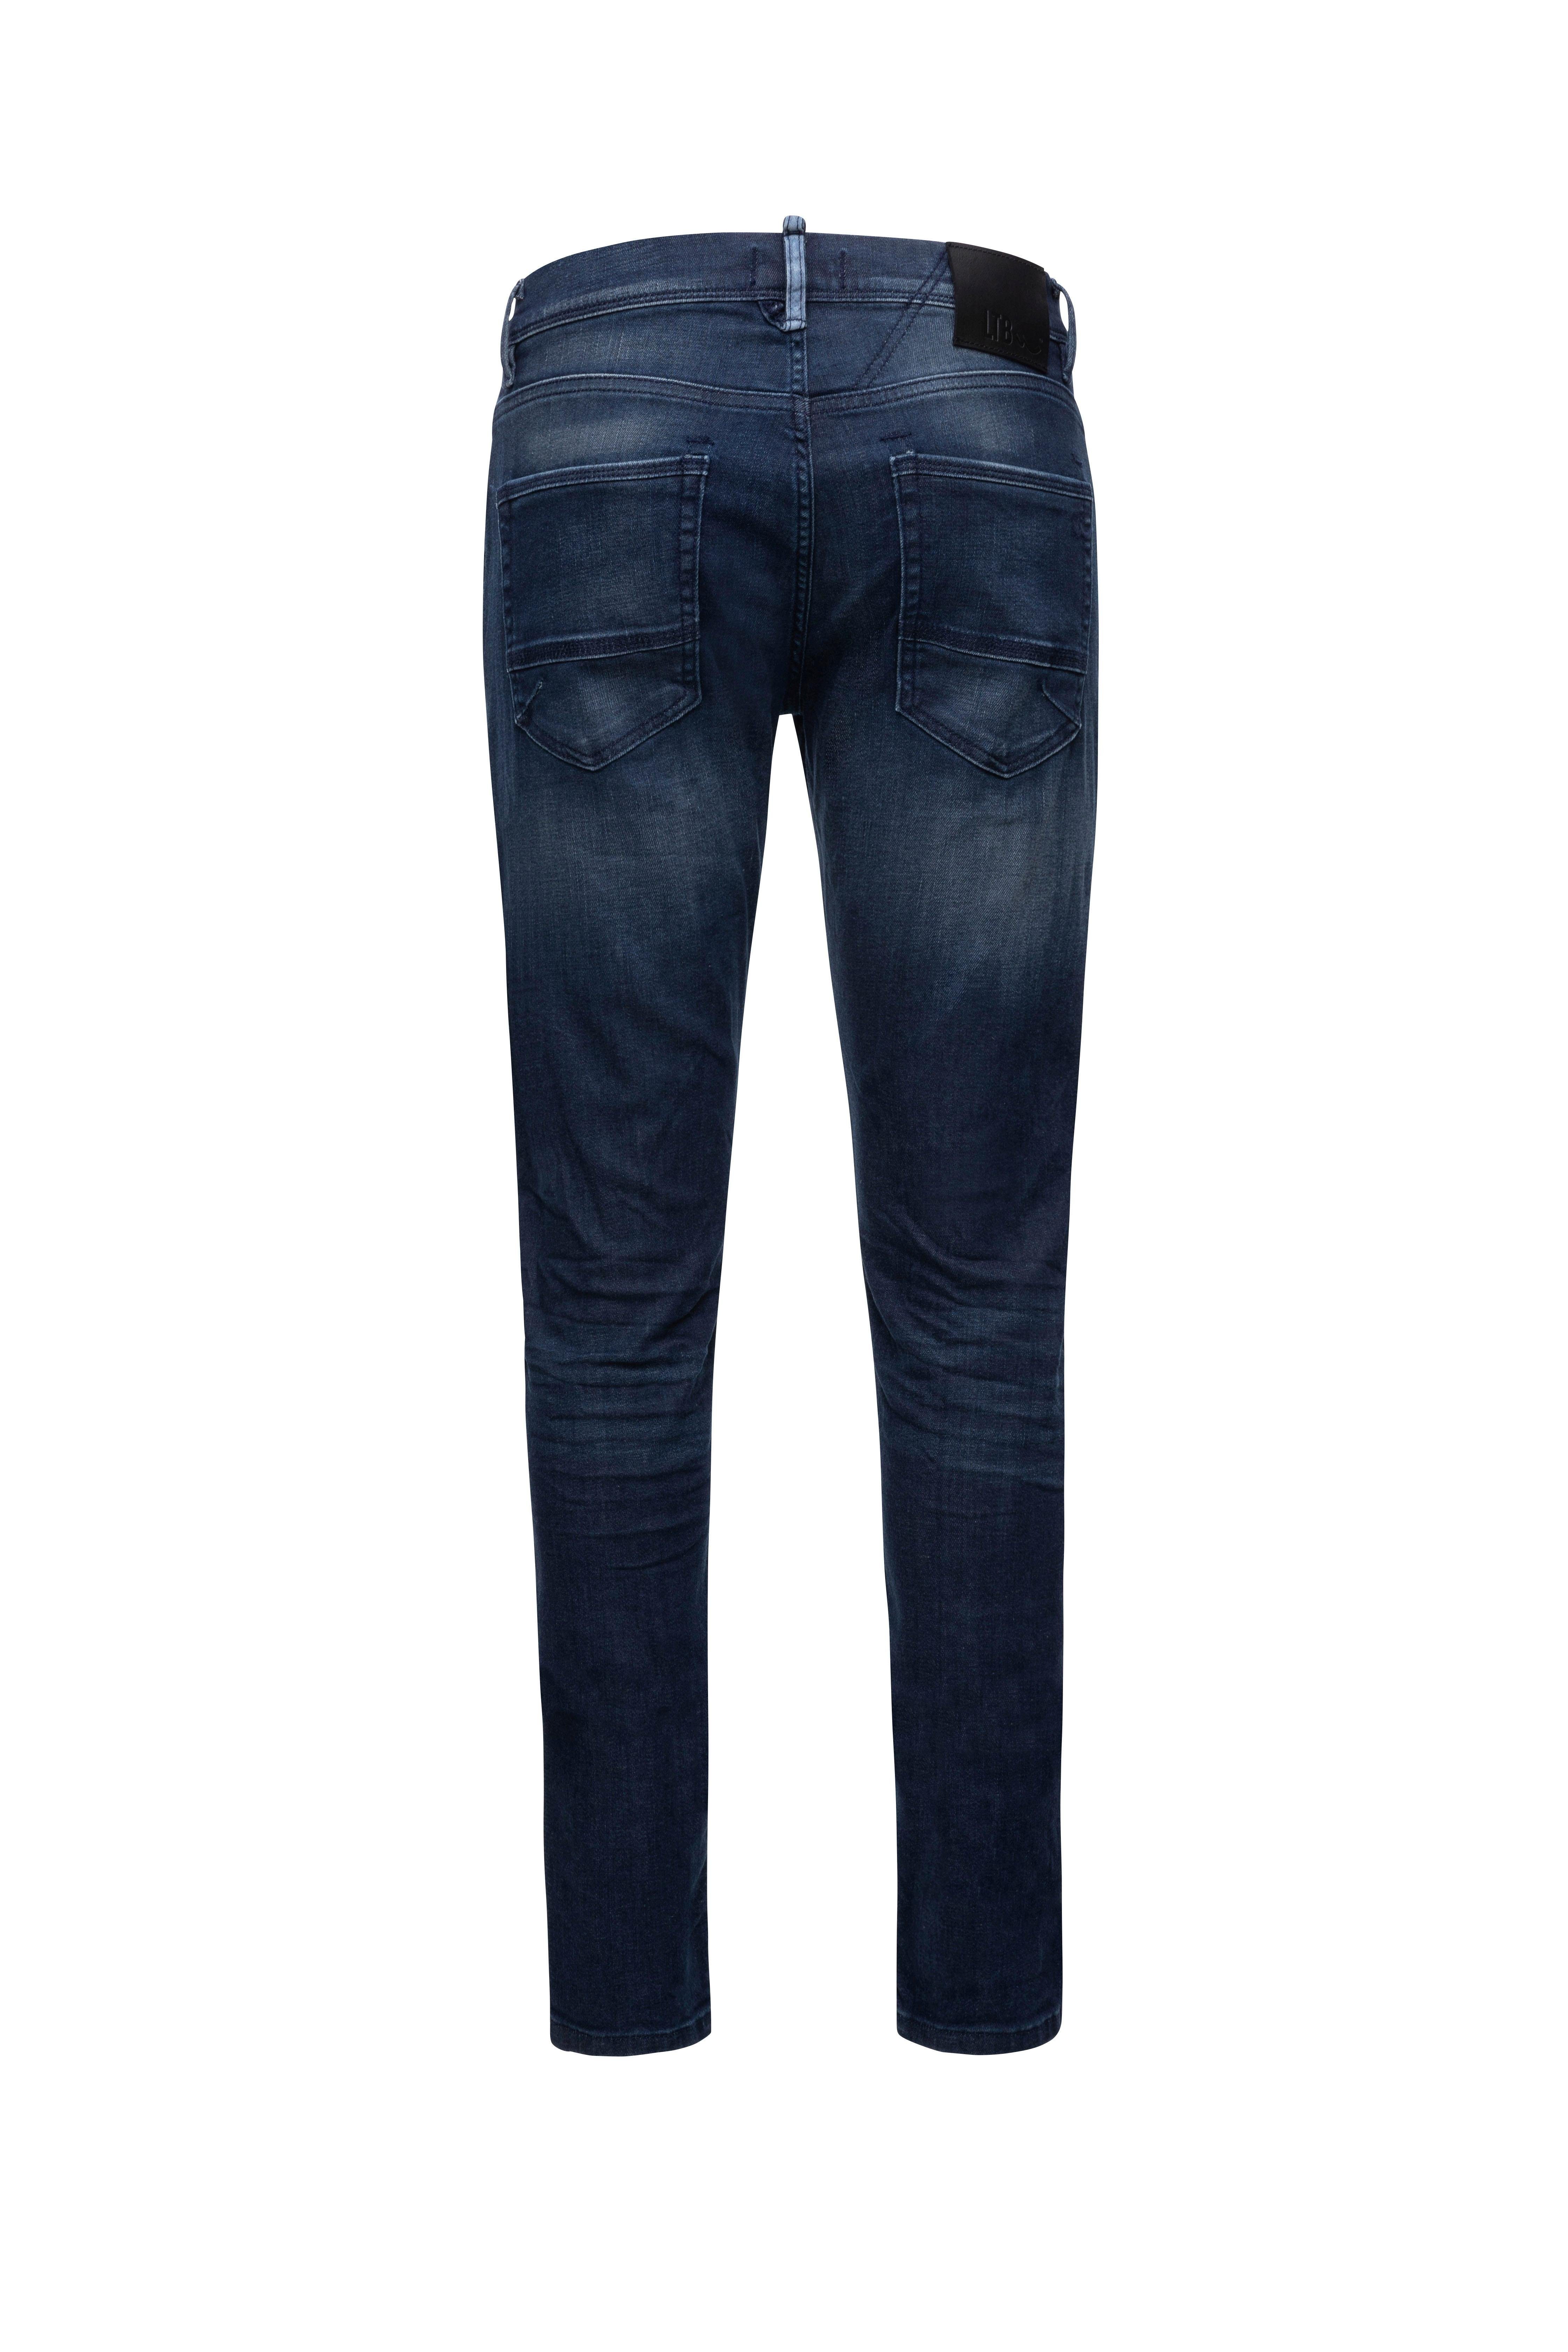 SERVANDO Tapered-fit-Jeans alroy LTB wash X D